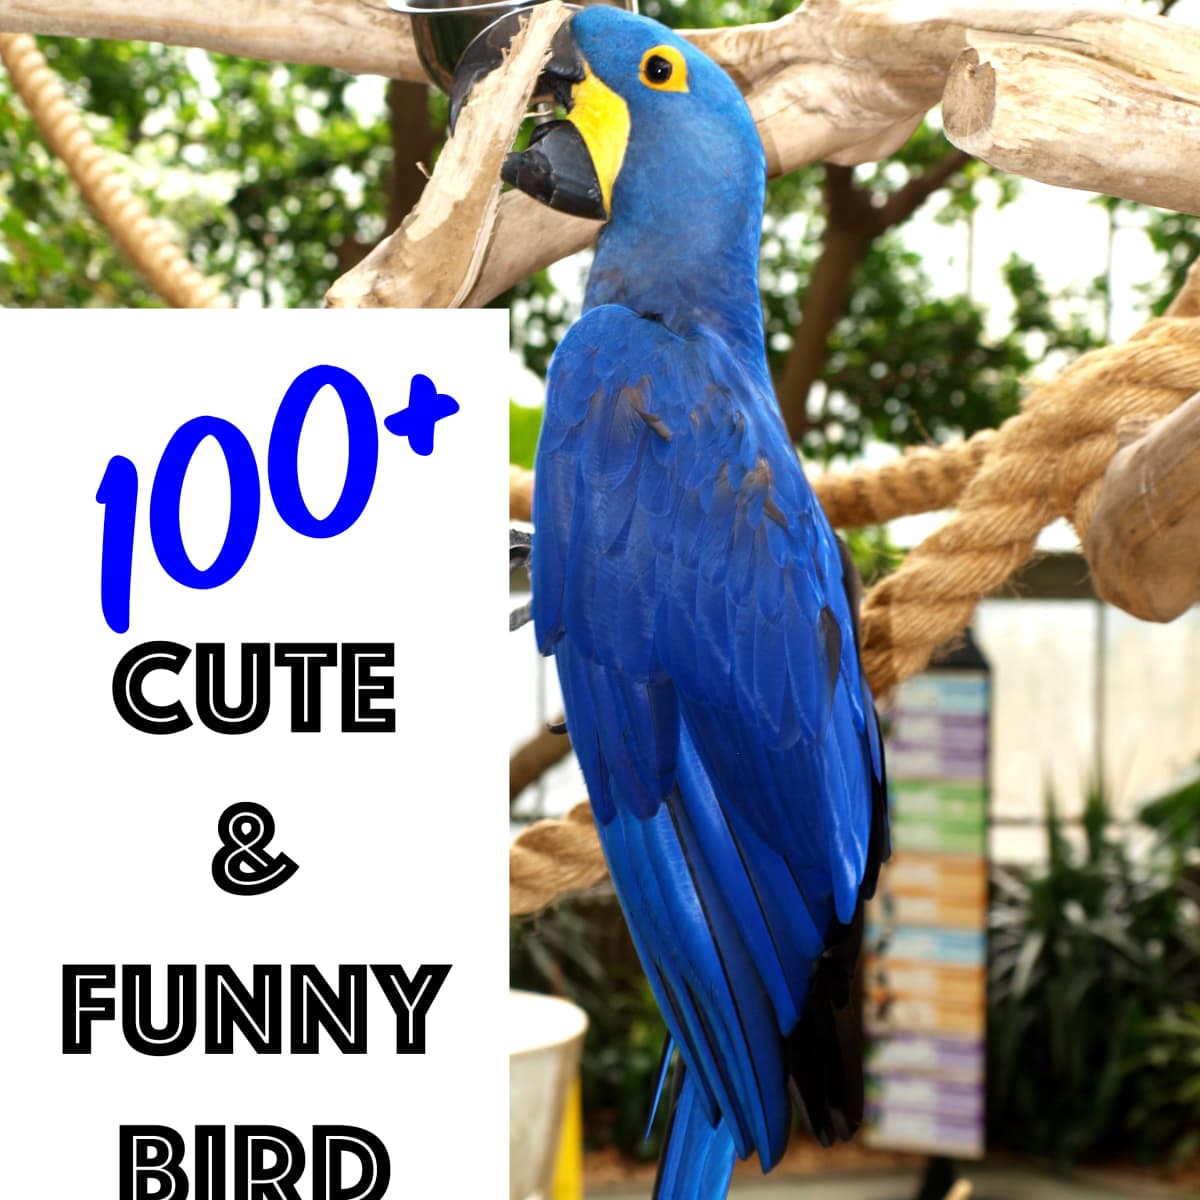 100+ Cute and Funny Bird Names (From Mr. Beaks to Whistler) - PetHelpful